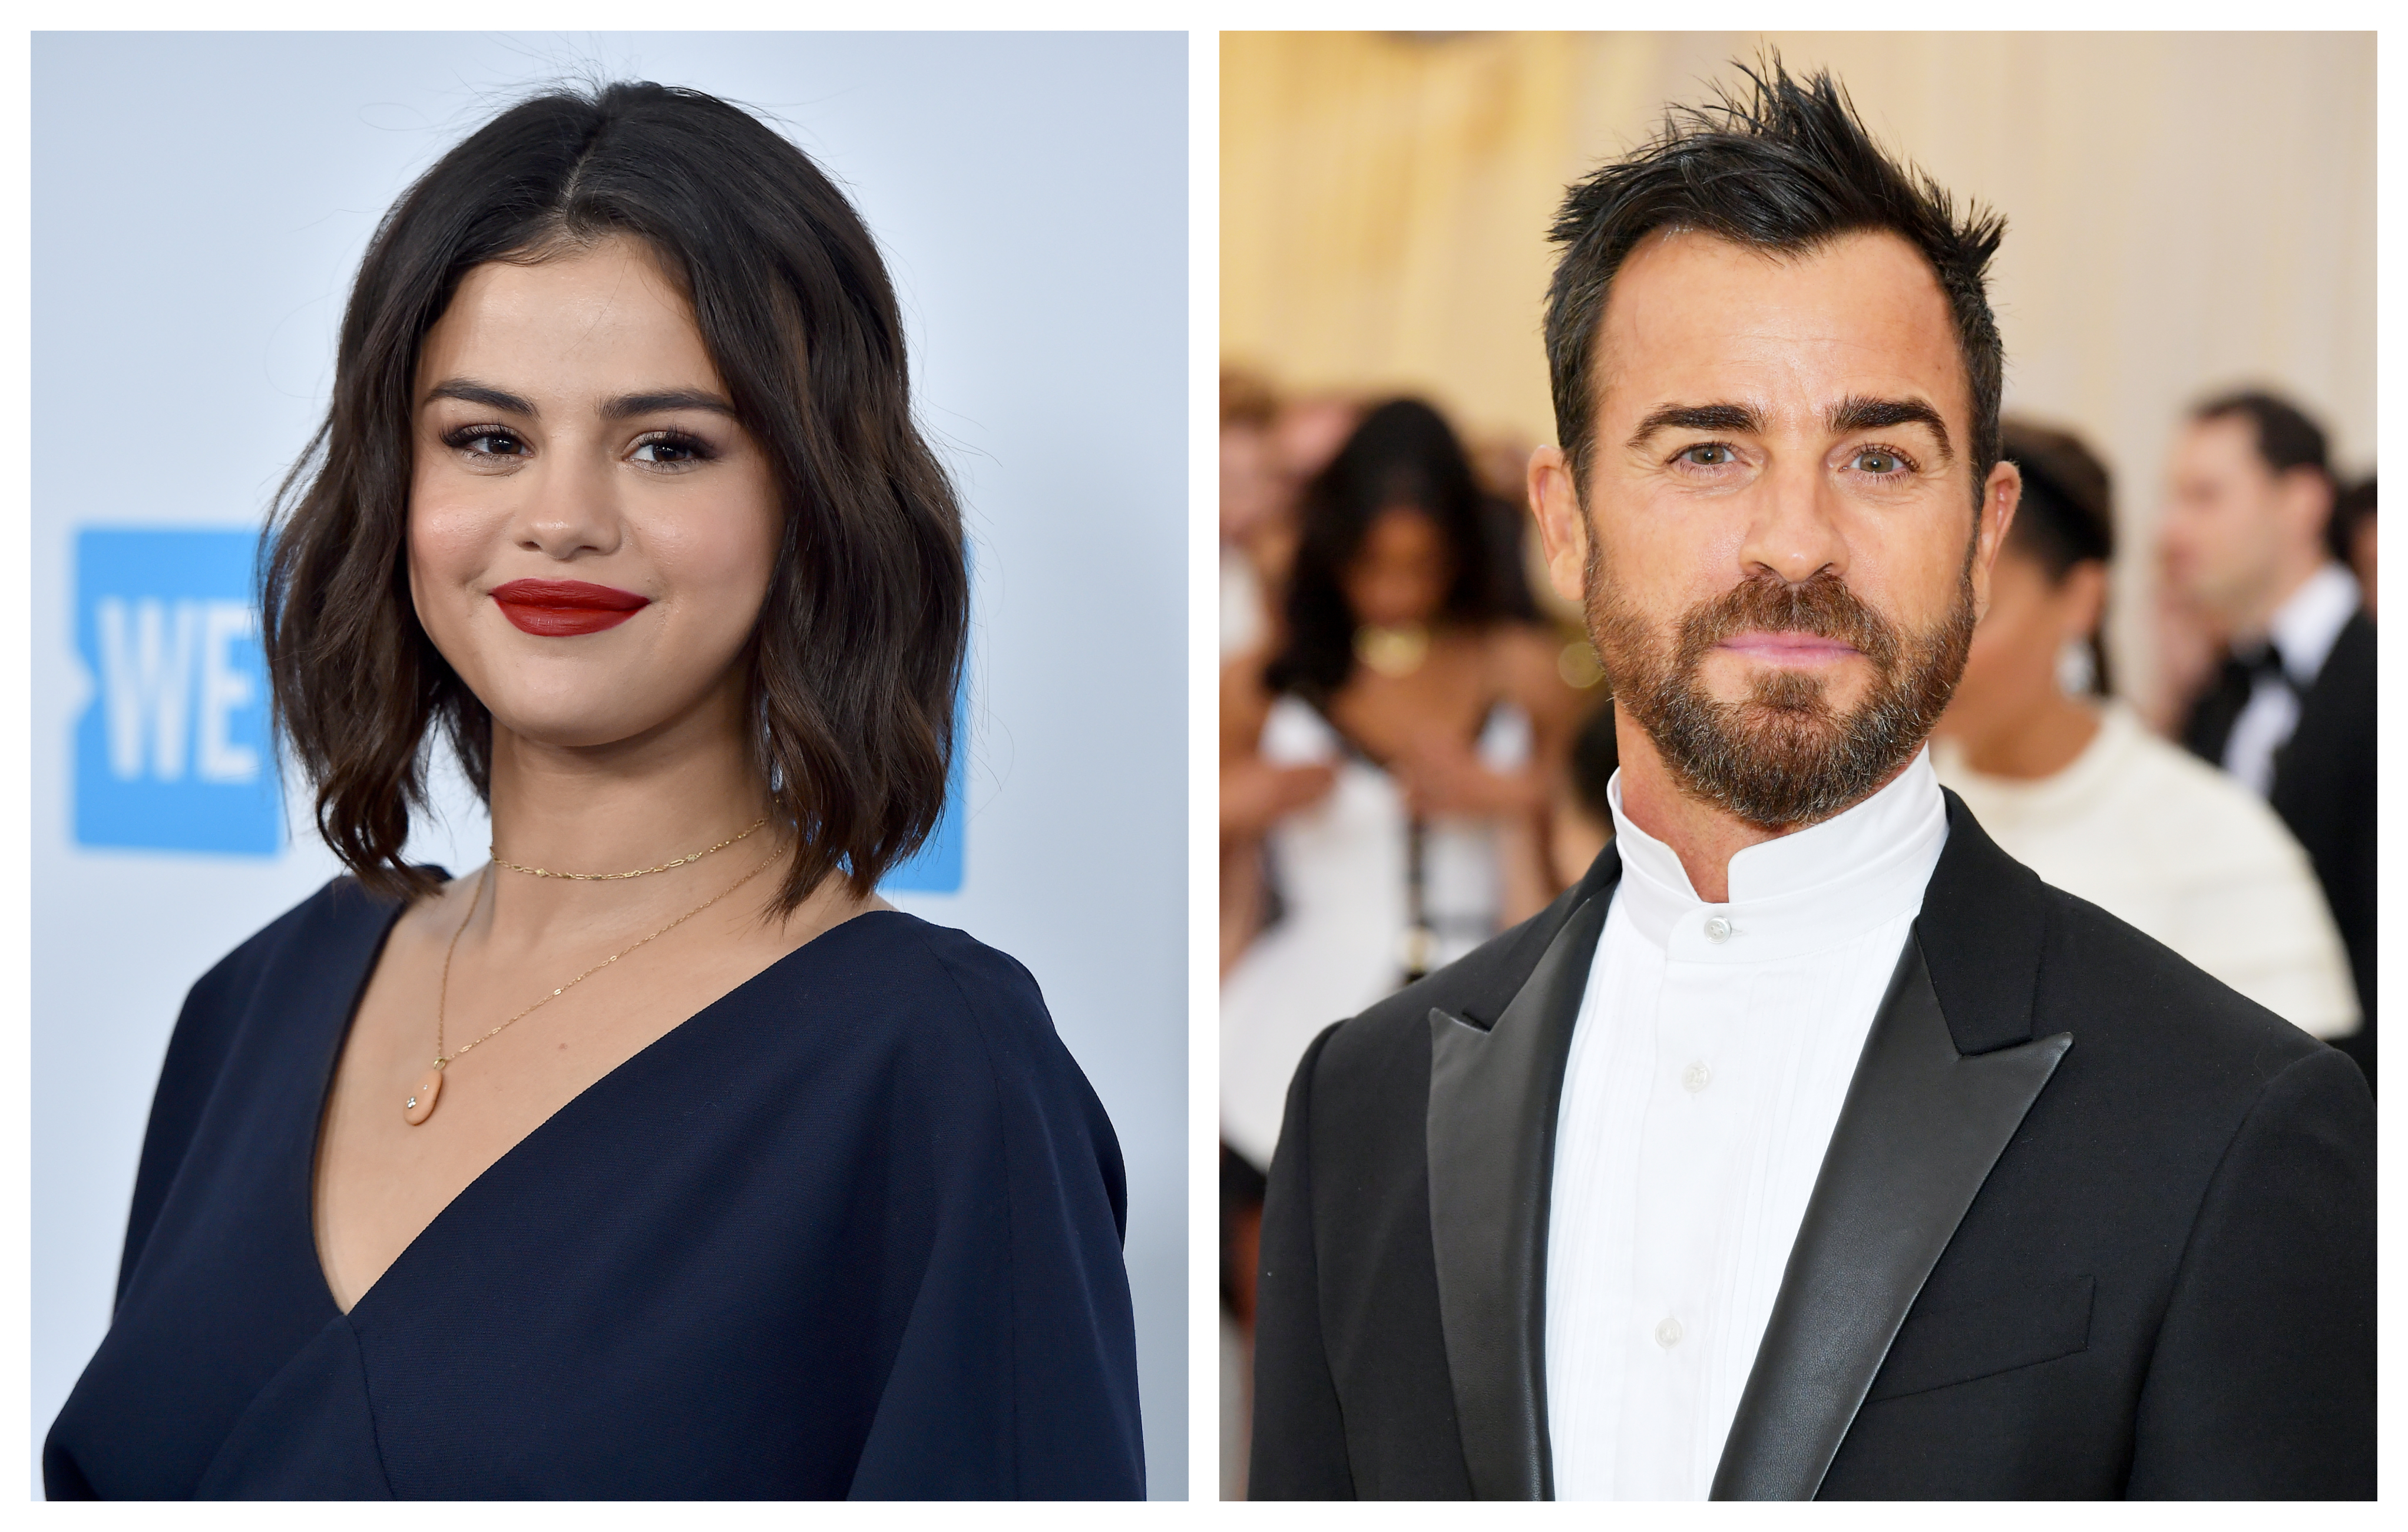 Justin theroux dating who 2018 is Who Is